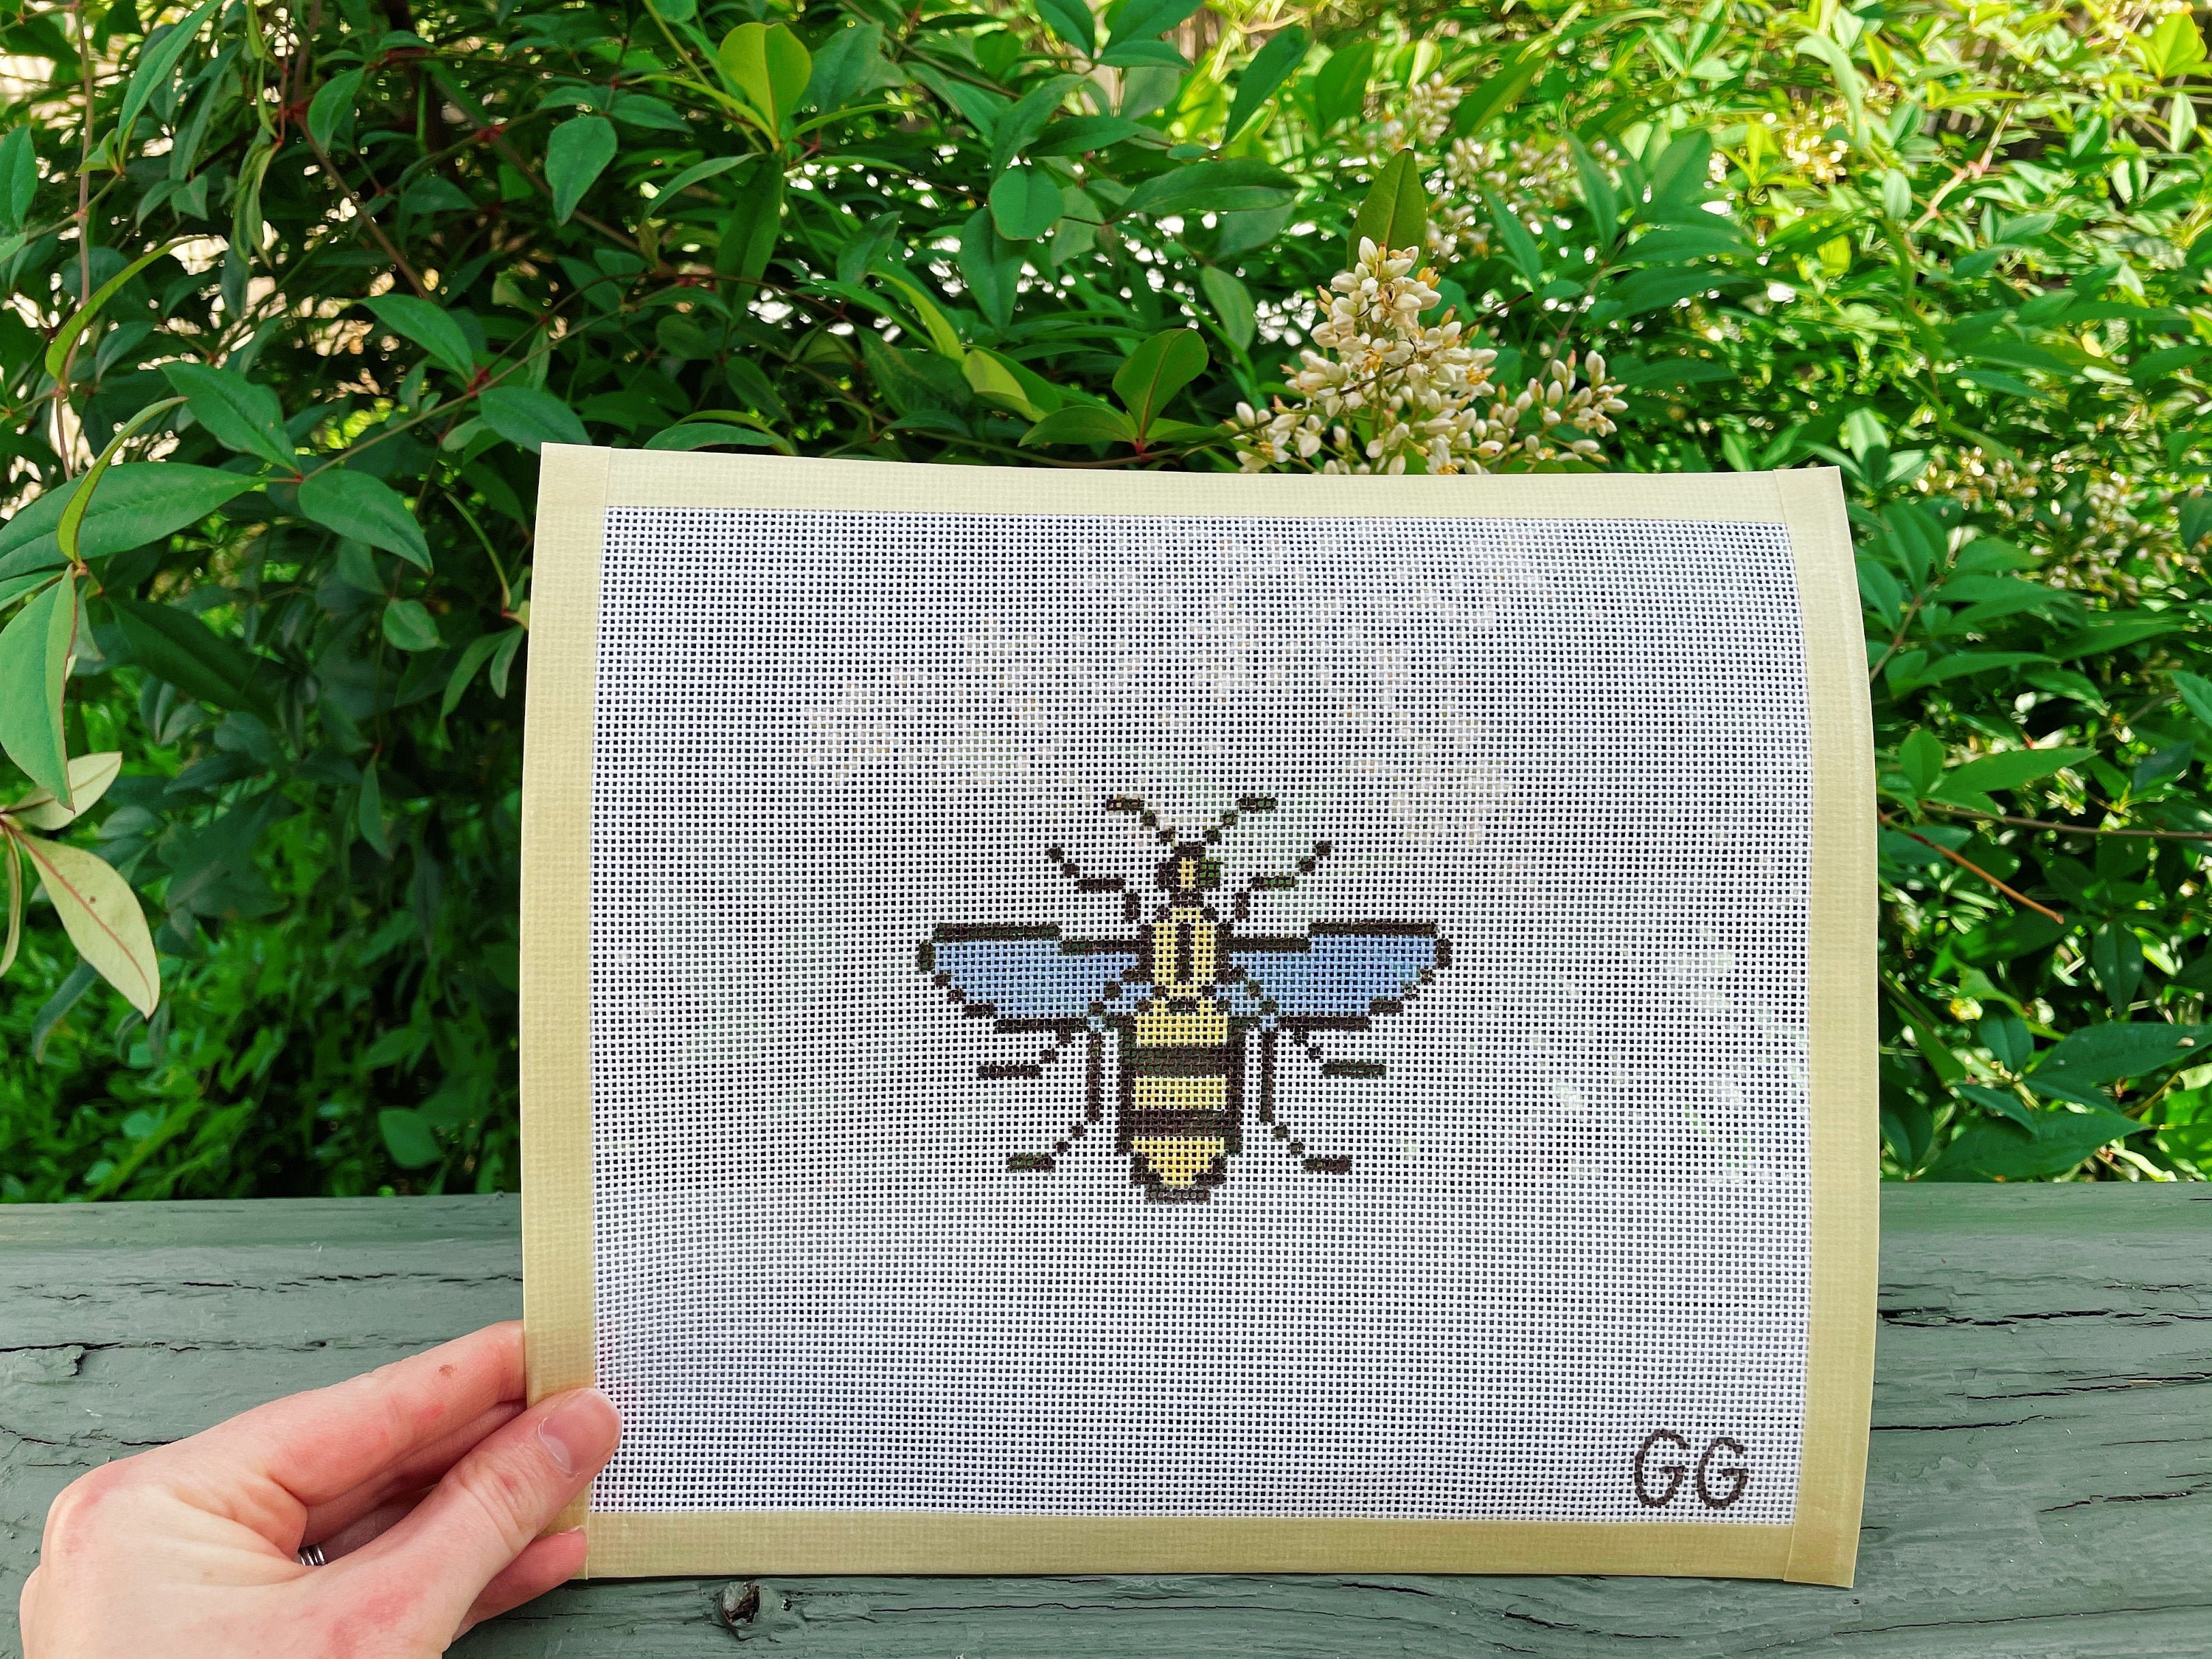 Canvas ~ Bumble Bee Stripes 3 Sq. handpainted Needlepoint Canvas Need –  Needlepoint by Wildflowers